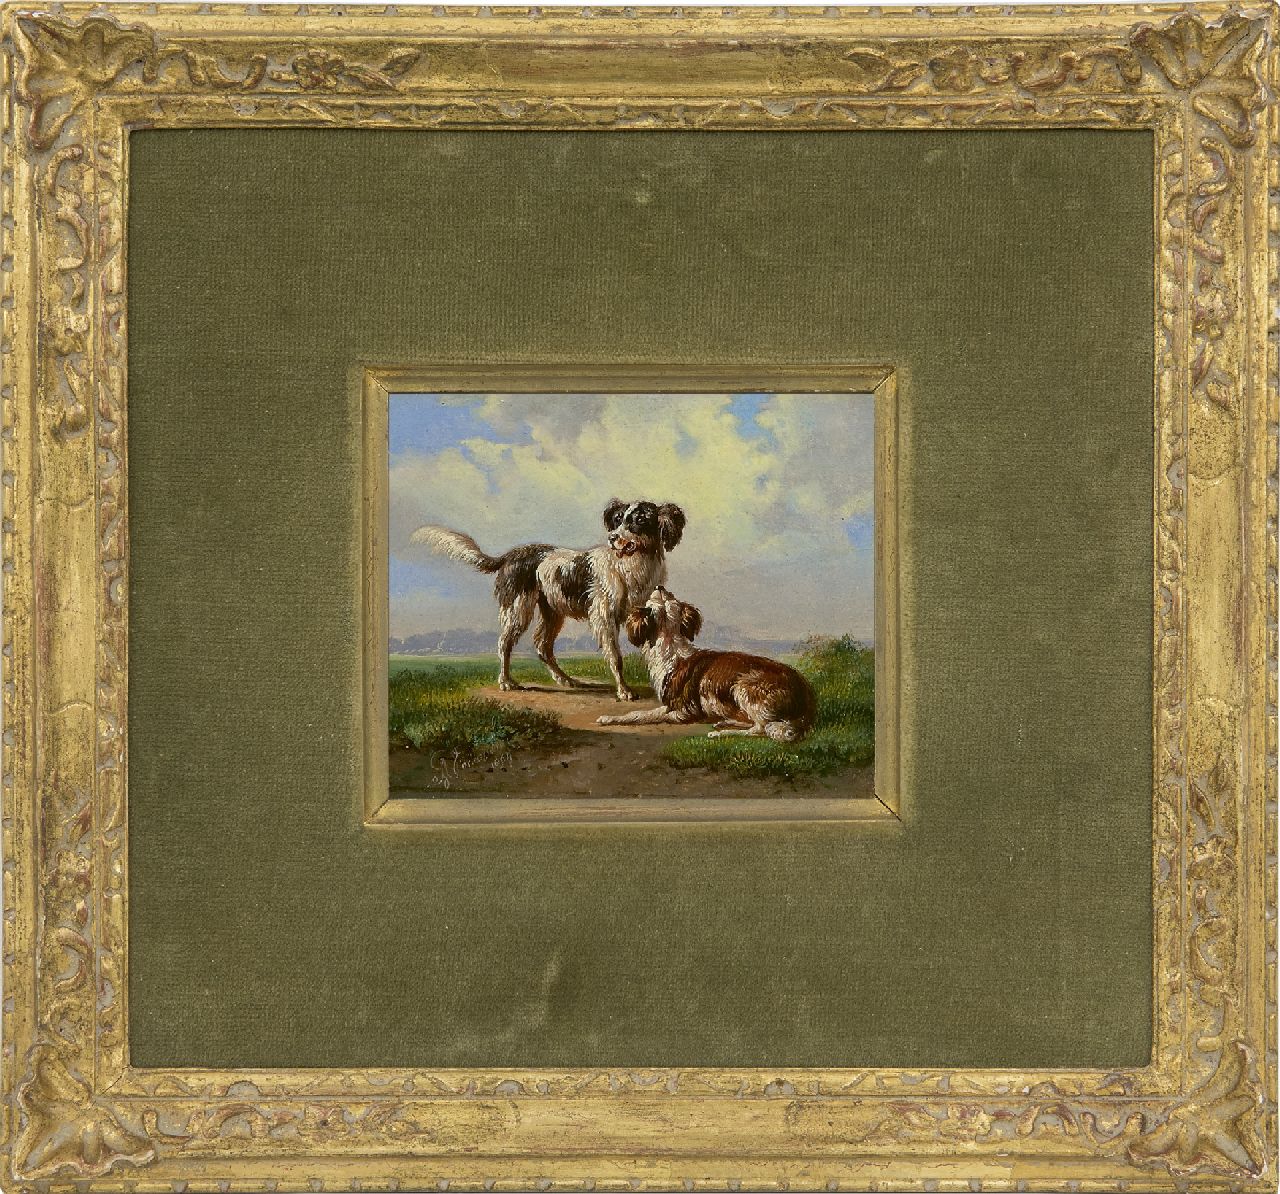 Verhoesen A.  | Albertus Verhoesen, Two hounds in a landscape, oil on panel 10.8 x 12.4 cm, signed l.l. and dated 1864